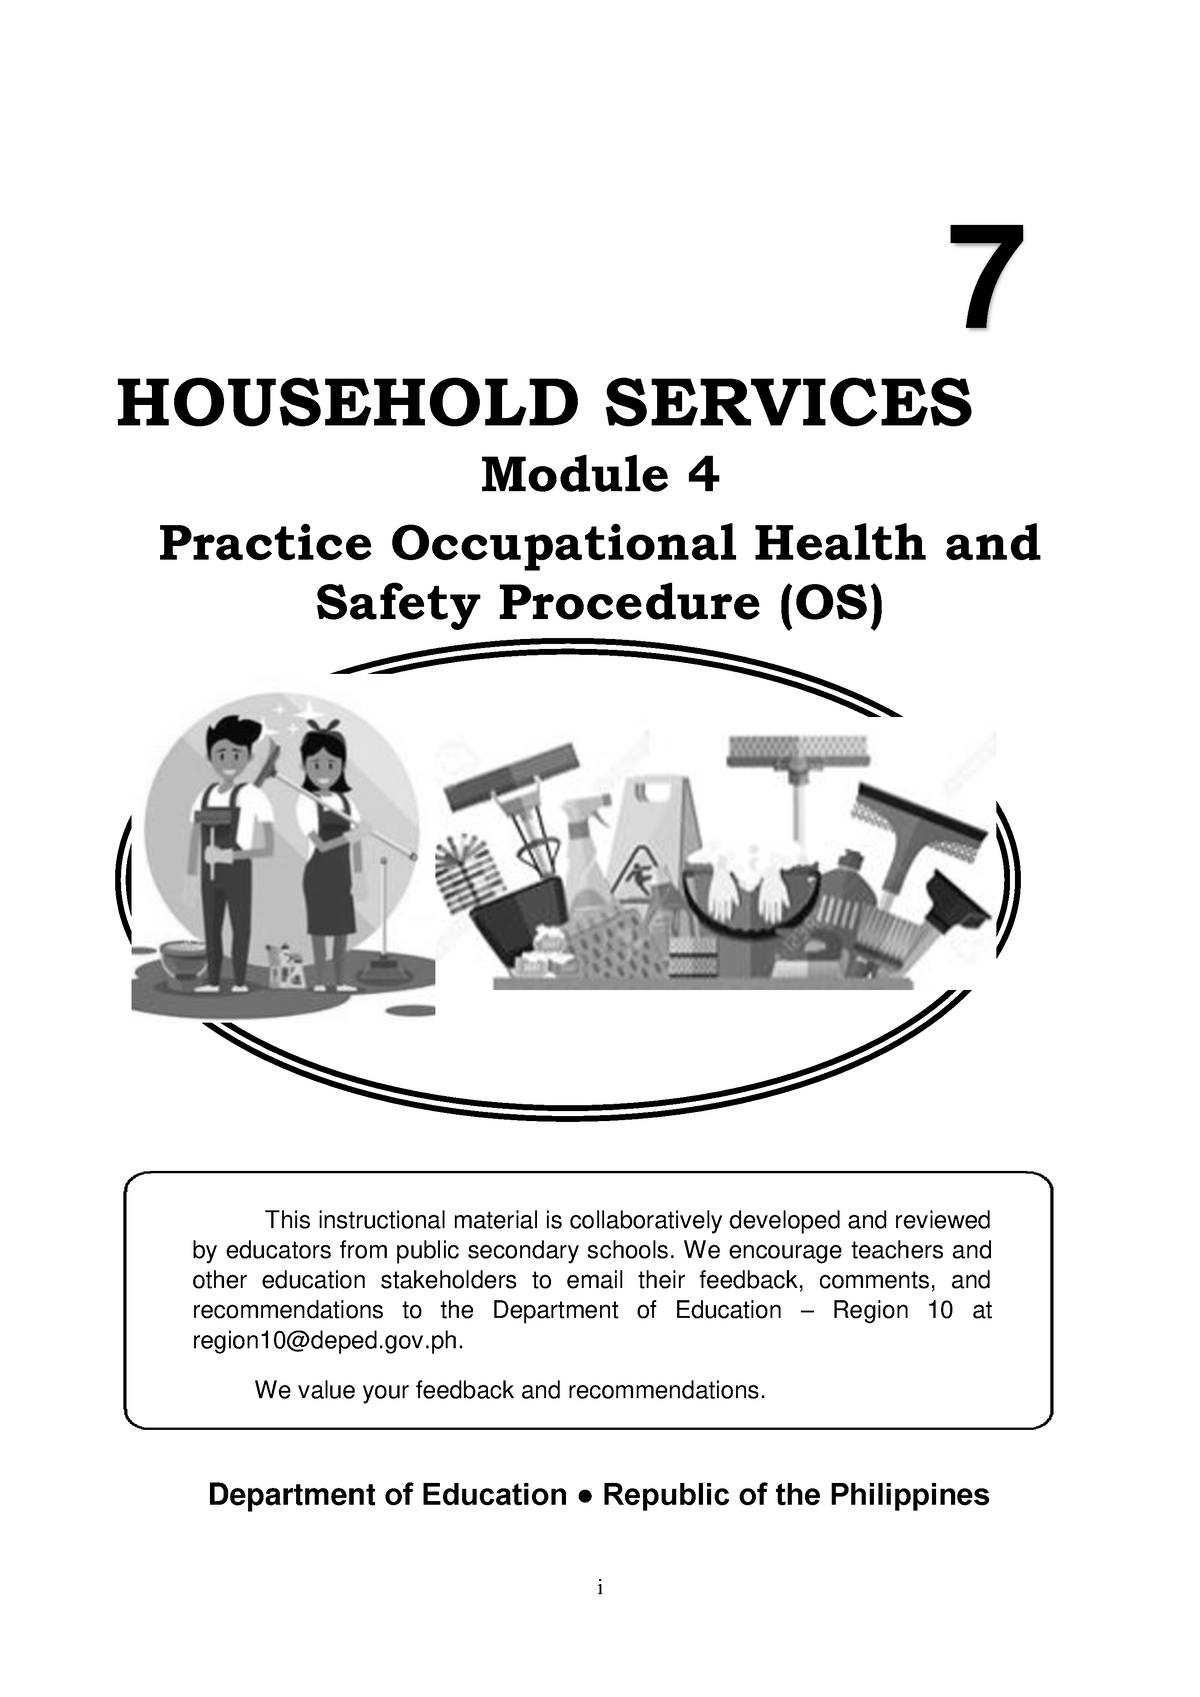 Basic4. Practice Occupational Health and Safety Procedures, PDF, Occupational Safety And Health